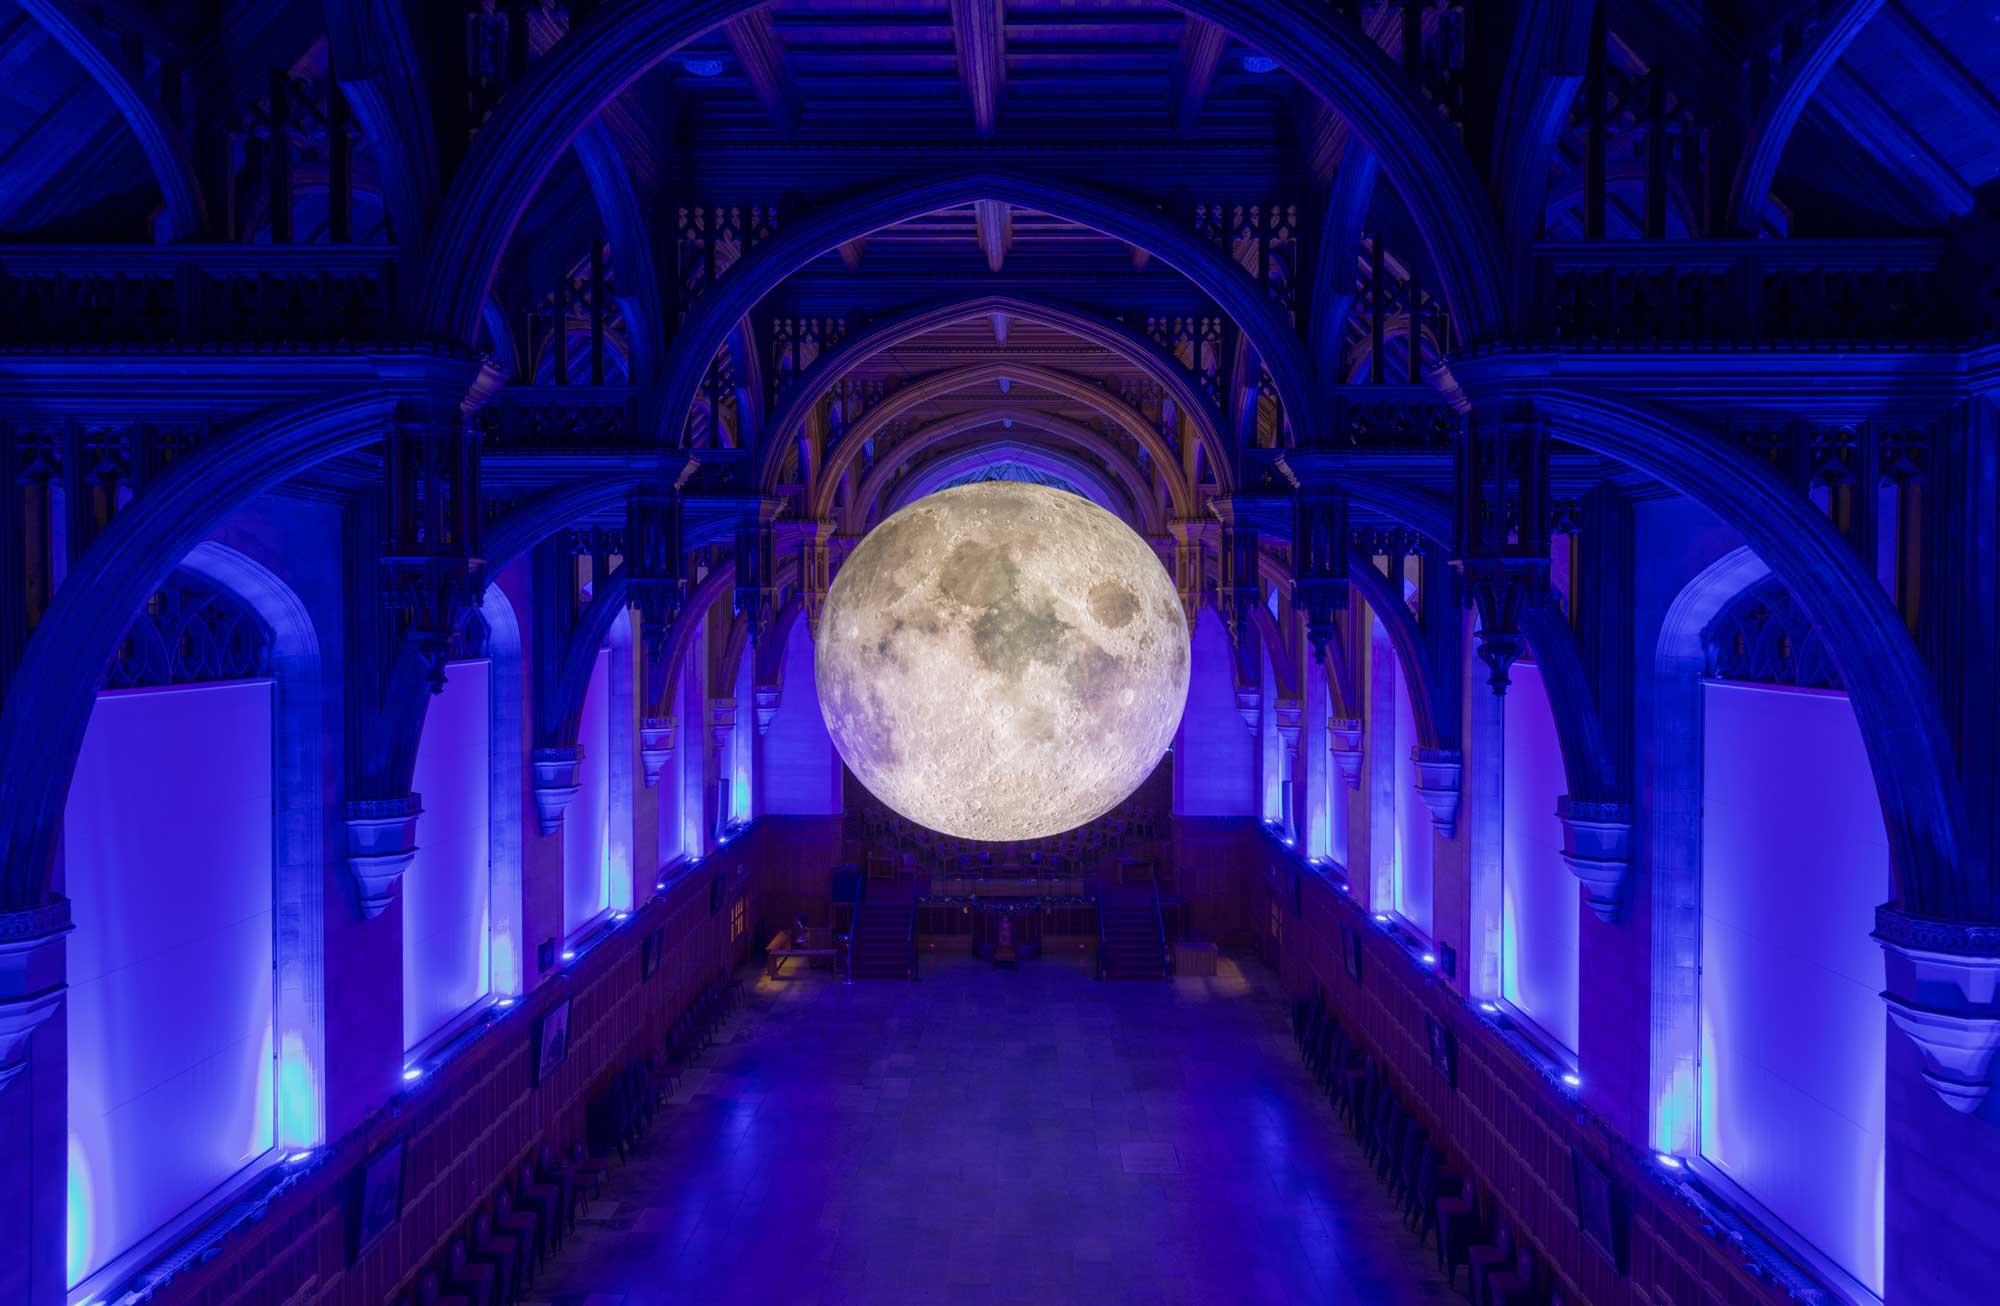 Museum of the Moon is a fusion of lunar imagery, moonlight and a sound composition created by award-winning composer Dan Jones